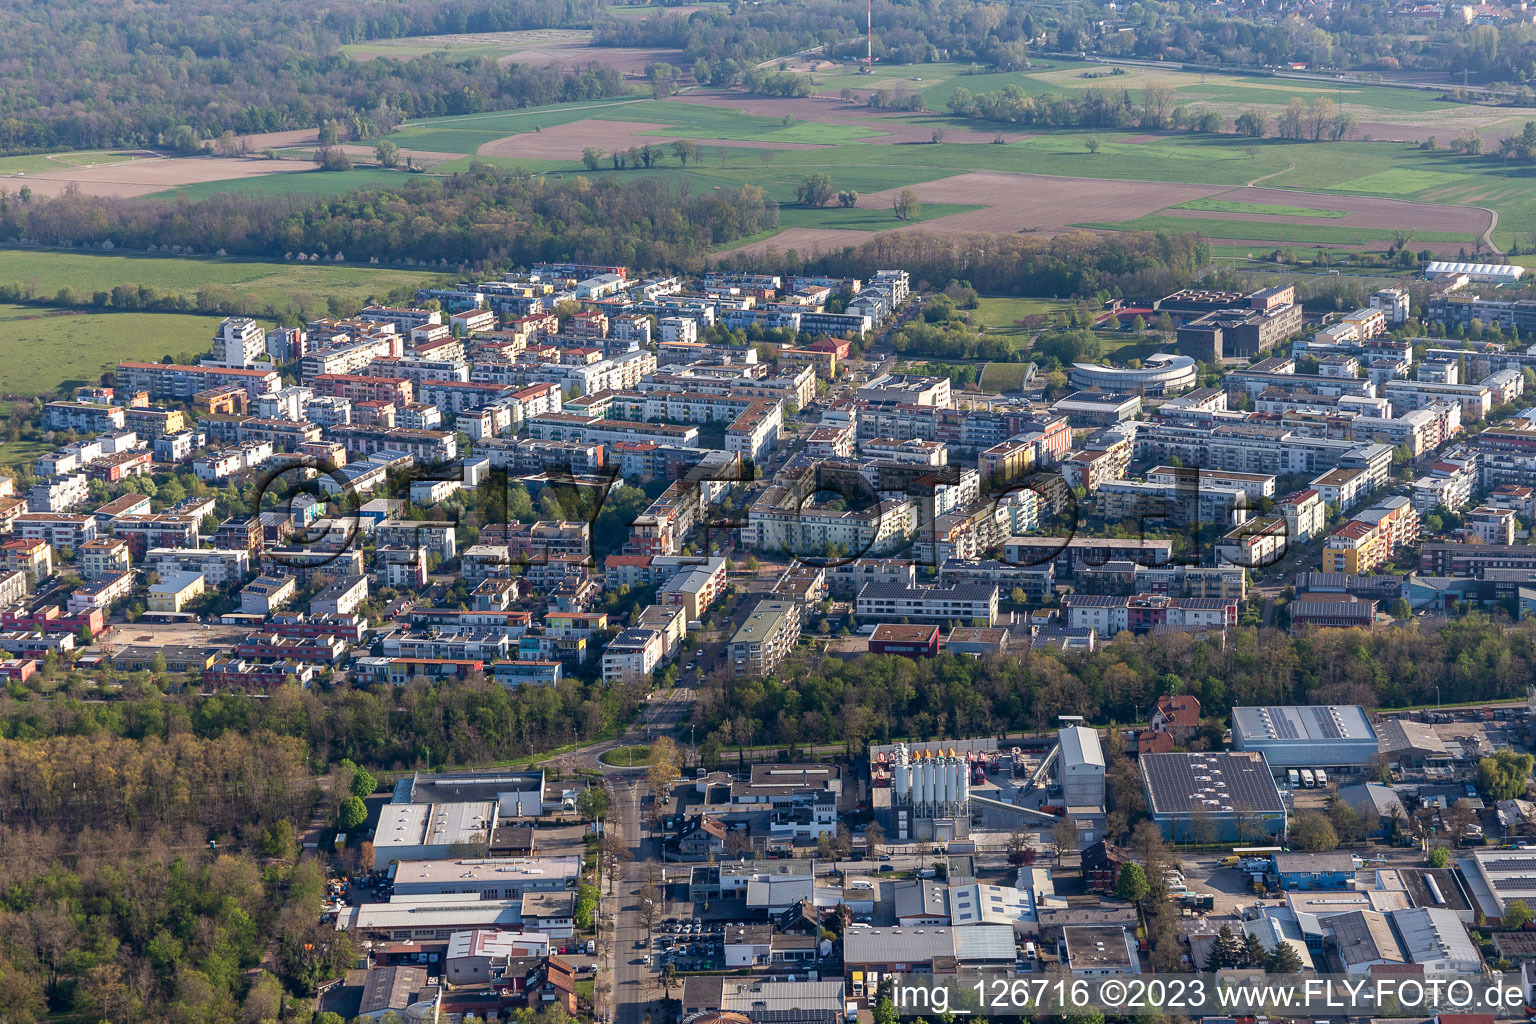 Aerial view of Outskirts residential in the district Rieselfeld in Freiburg im Breisgau in the state Baden-Wuerttemberg, Germany